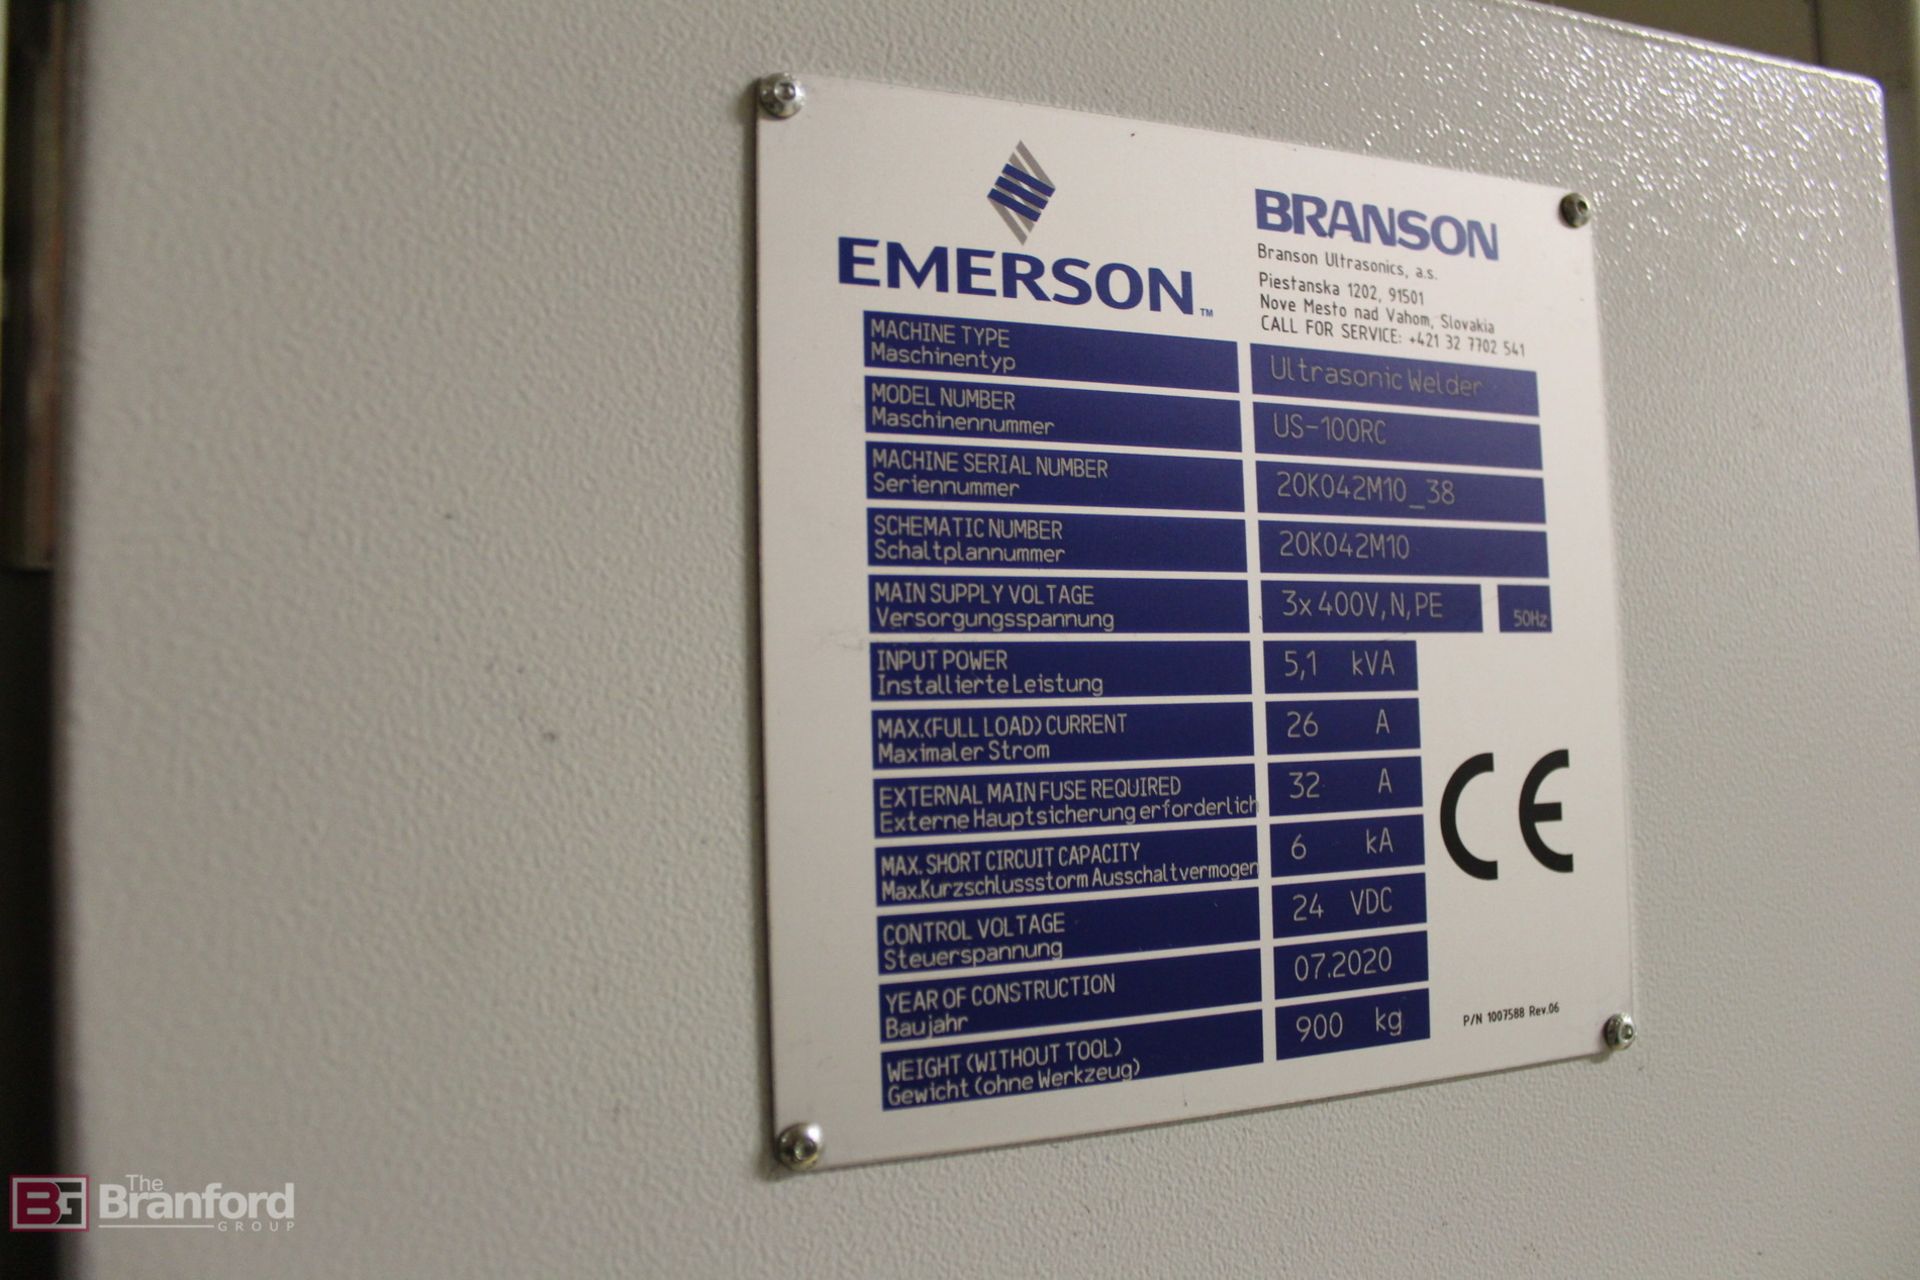 Emerson Branson US-100RC Ultrasonic Rotary Table Sealer/ Cutter - Image 4 of 4